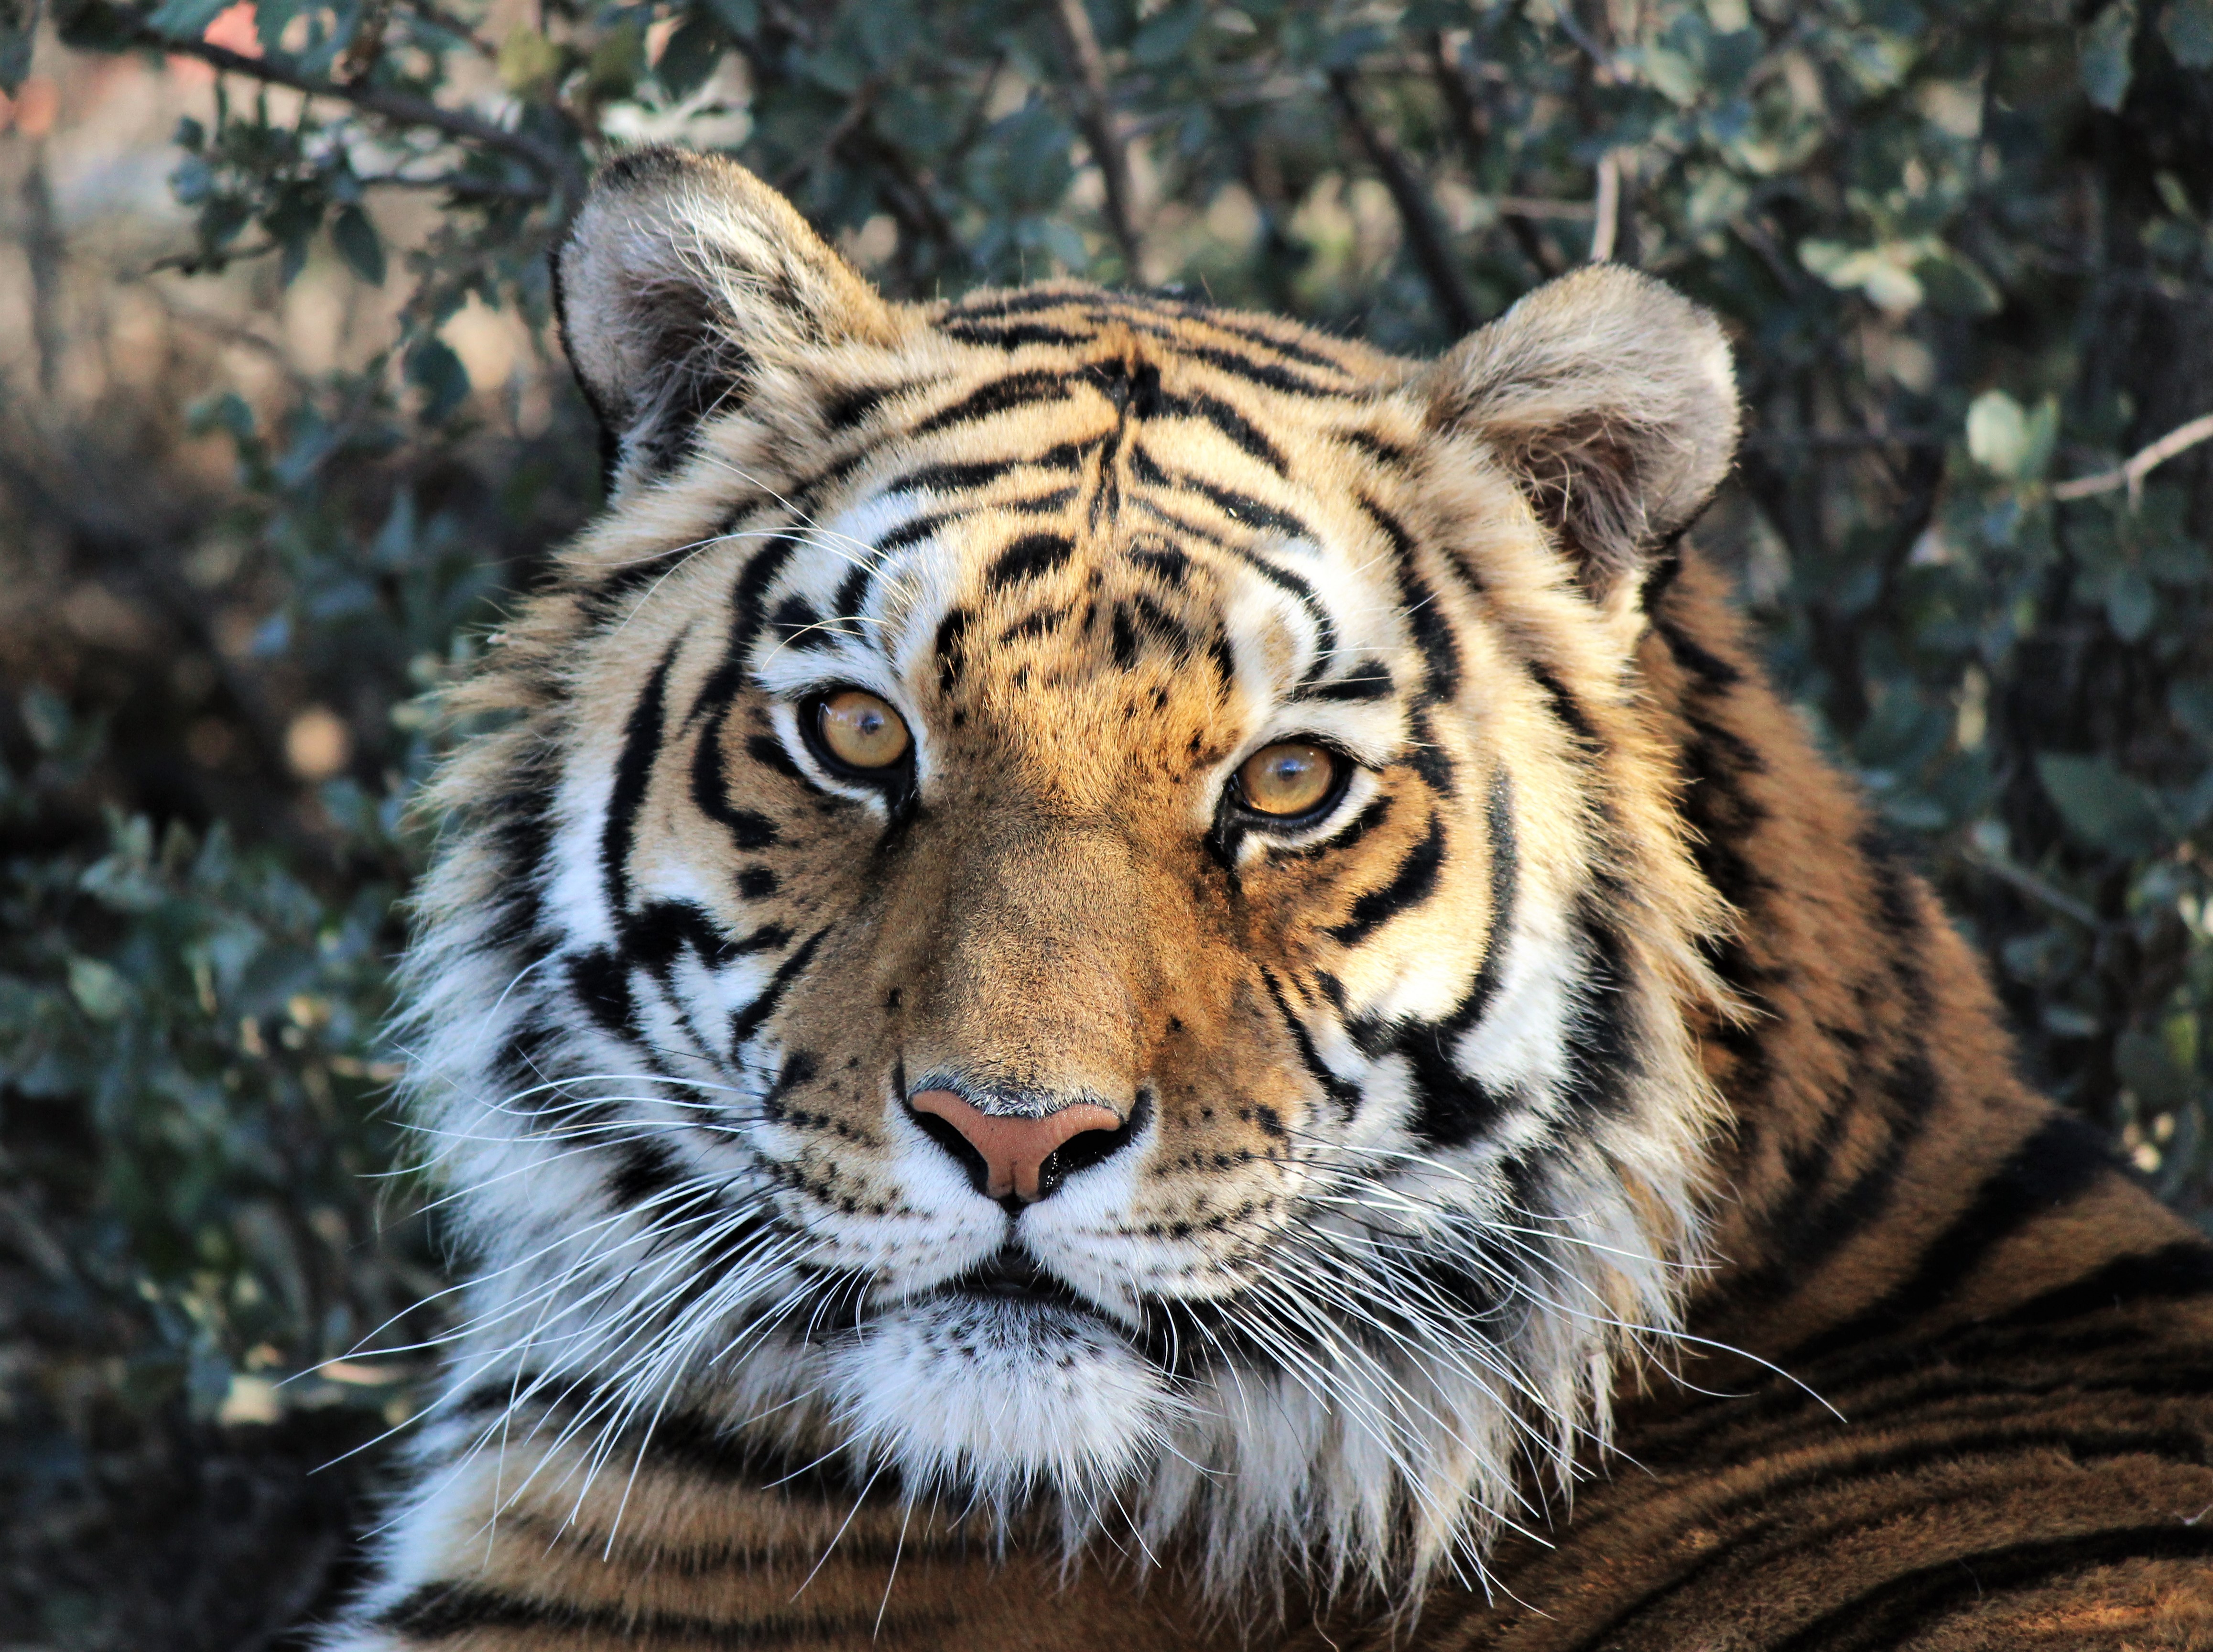 Heritage Park Zoo Bengal tiger 'Cassie' passes away | The ...